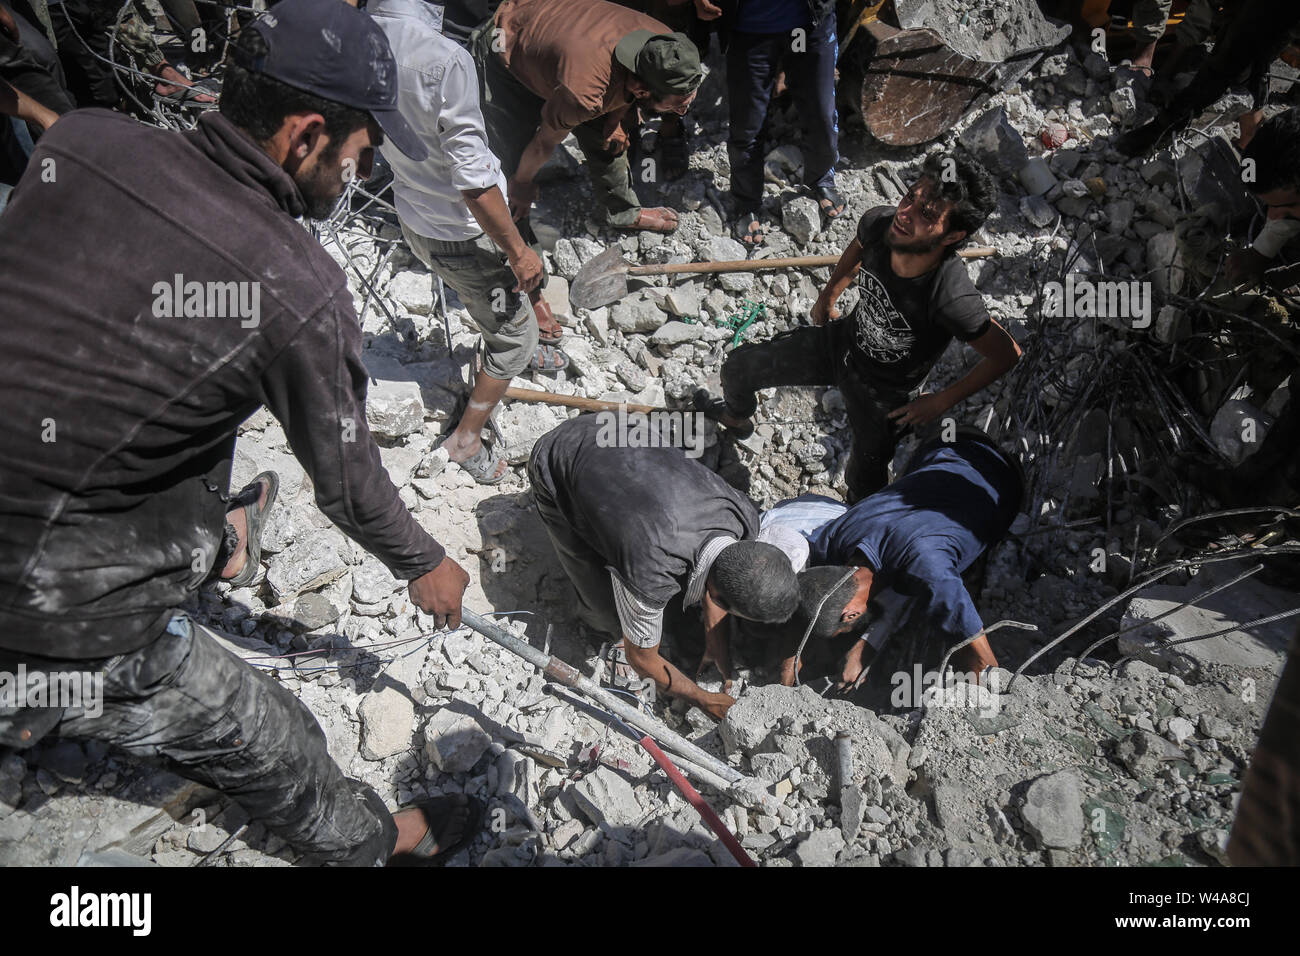 Urm Al Jaws, Syria. 21st July, 2019. Syrian civilians search for victims or survivors after a building collapsed during a reported air strike by pro-regime forces in the town of Urm Al-Jaws south of Idlib. Credit: Anas Alkharboutli/dpa/Alamy Live News Stock Photo